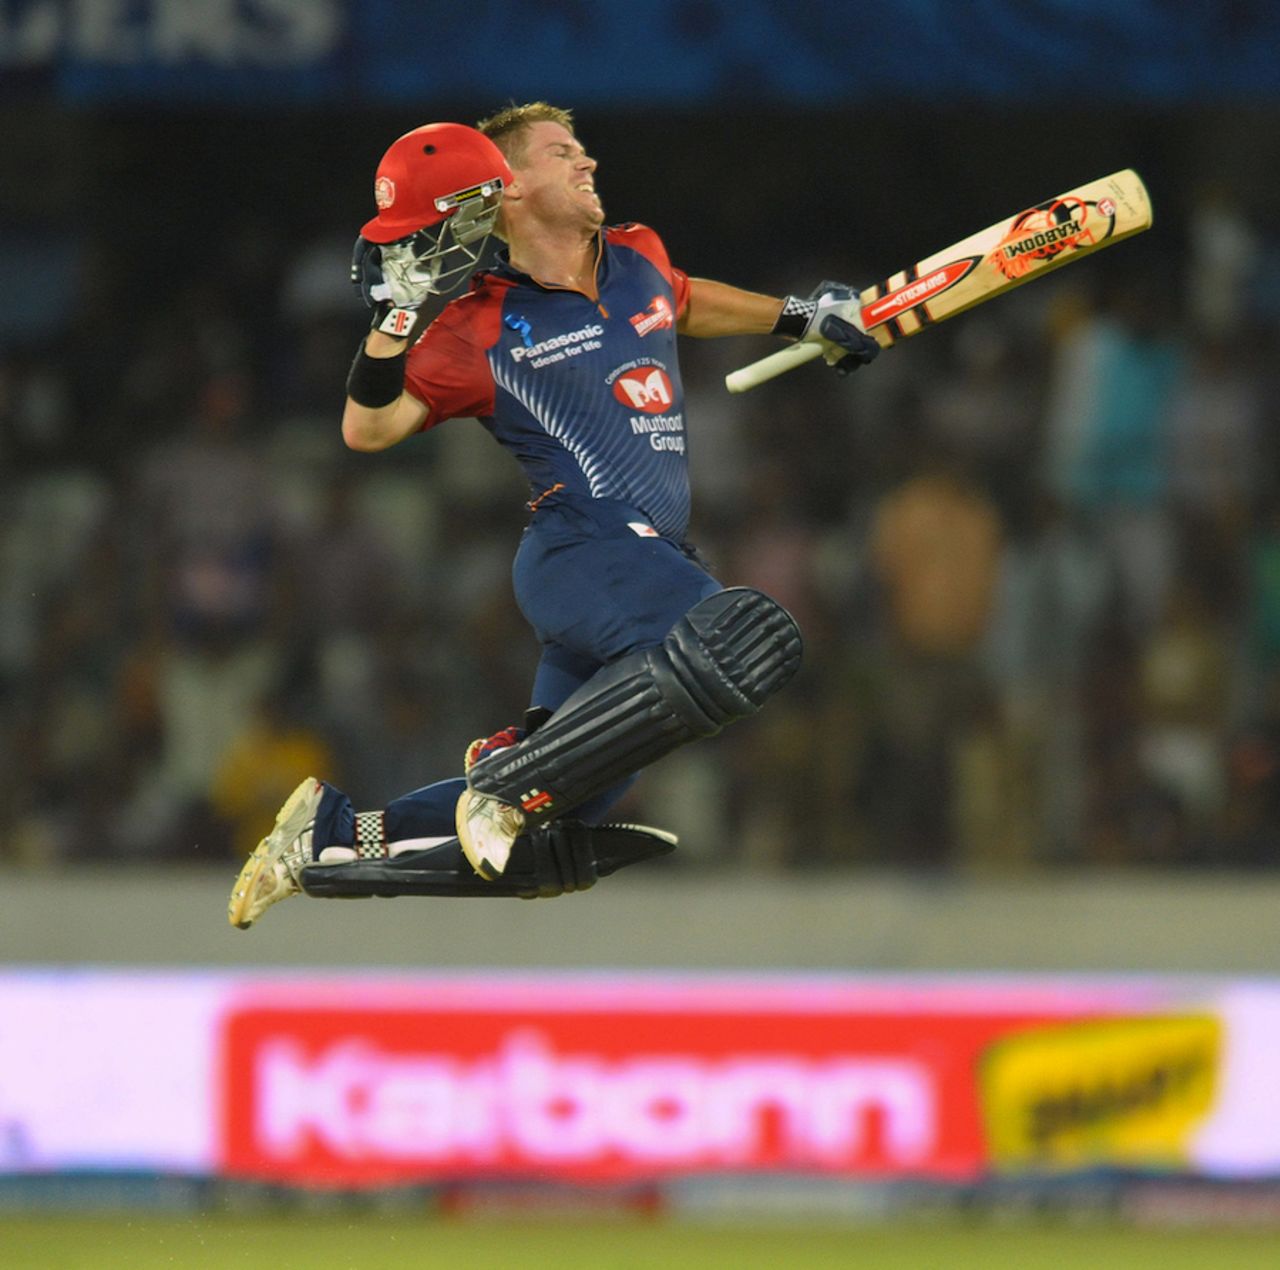 David Warner leaps in the air after scoring his second century in IPL, Deccan Chargers v Delhi Daredevils, IPL, Hyderabad, May 10, 2012